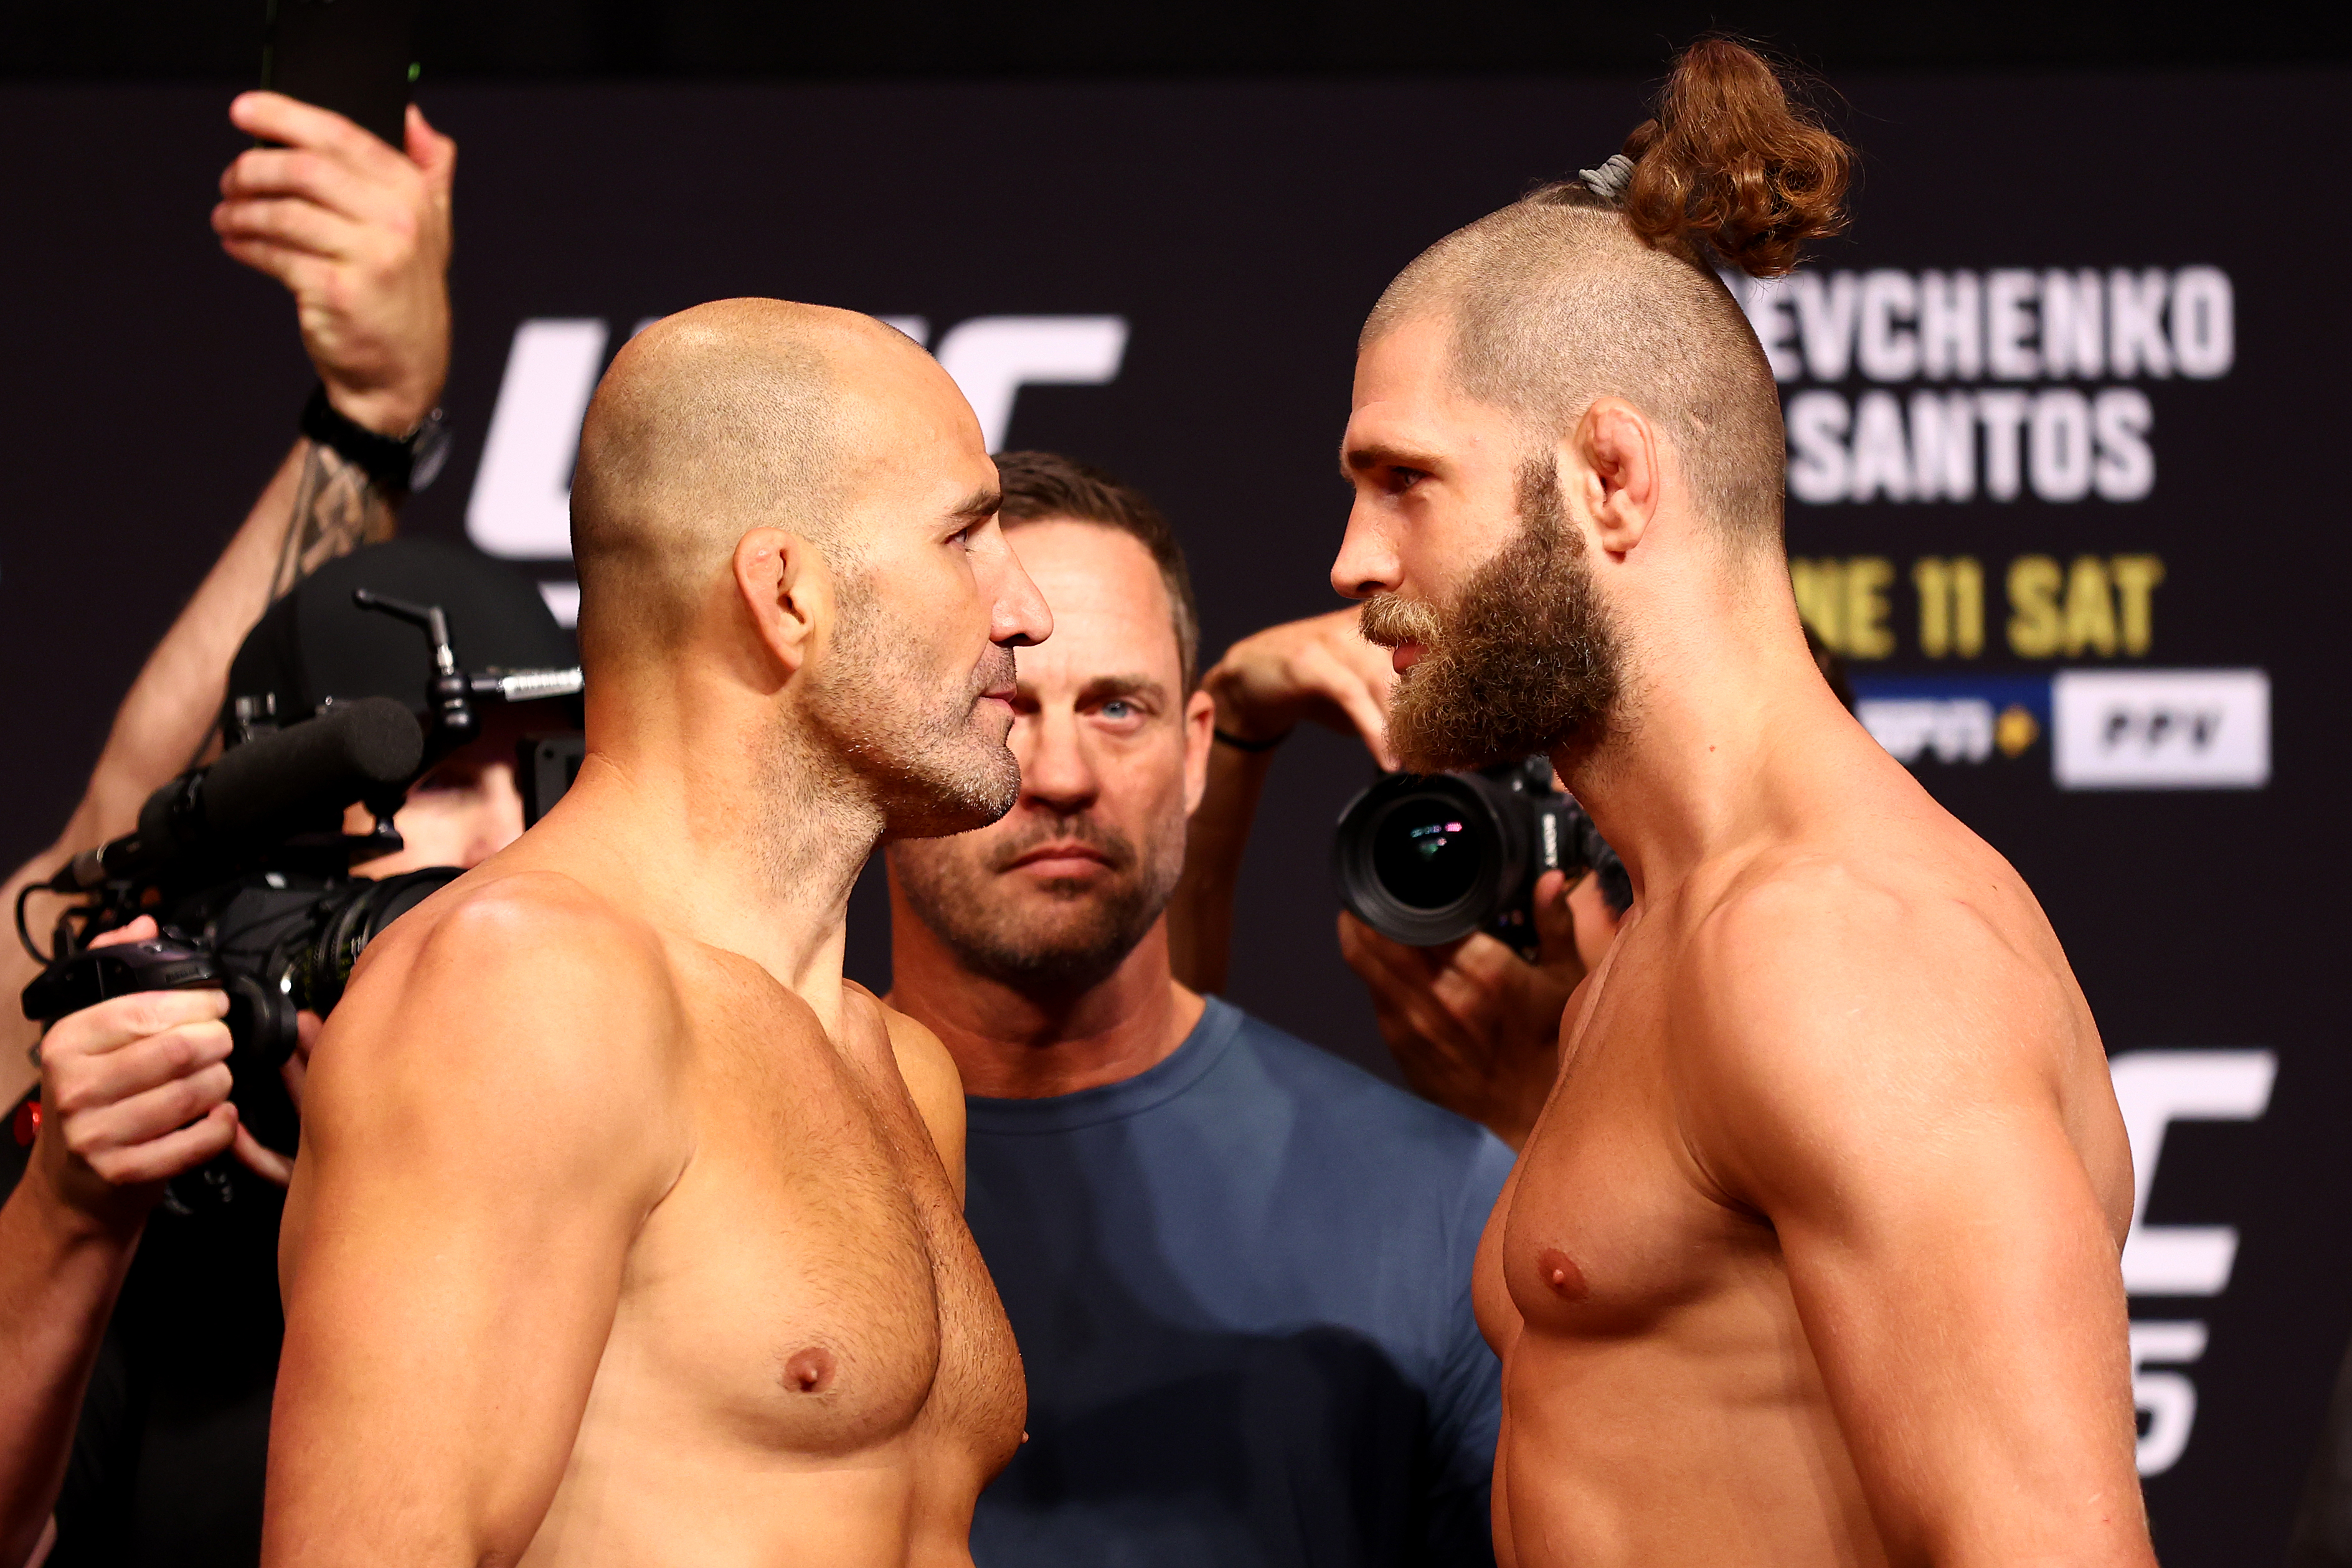 UFC light heavyweight champion Glover Texeira (L) of Brazil and Jiri Prochazka of the Czech Republic face off ahead of their title bout during the UFC 275 Weigh-in at Singapore Indoor Stadium on June 10, 2022 in Singapore.